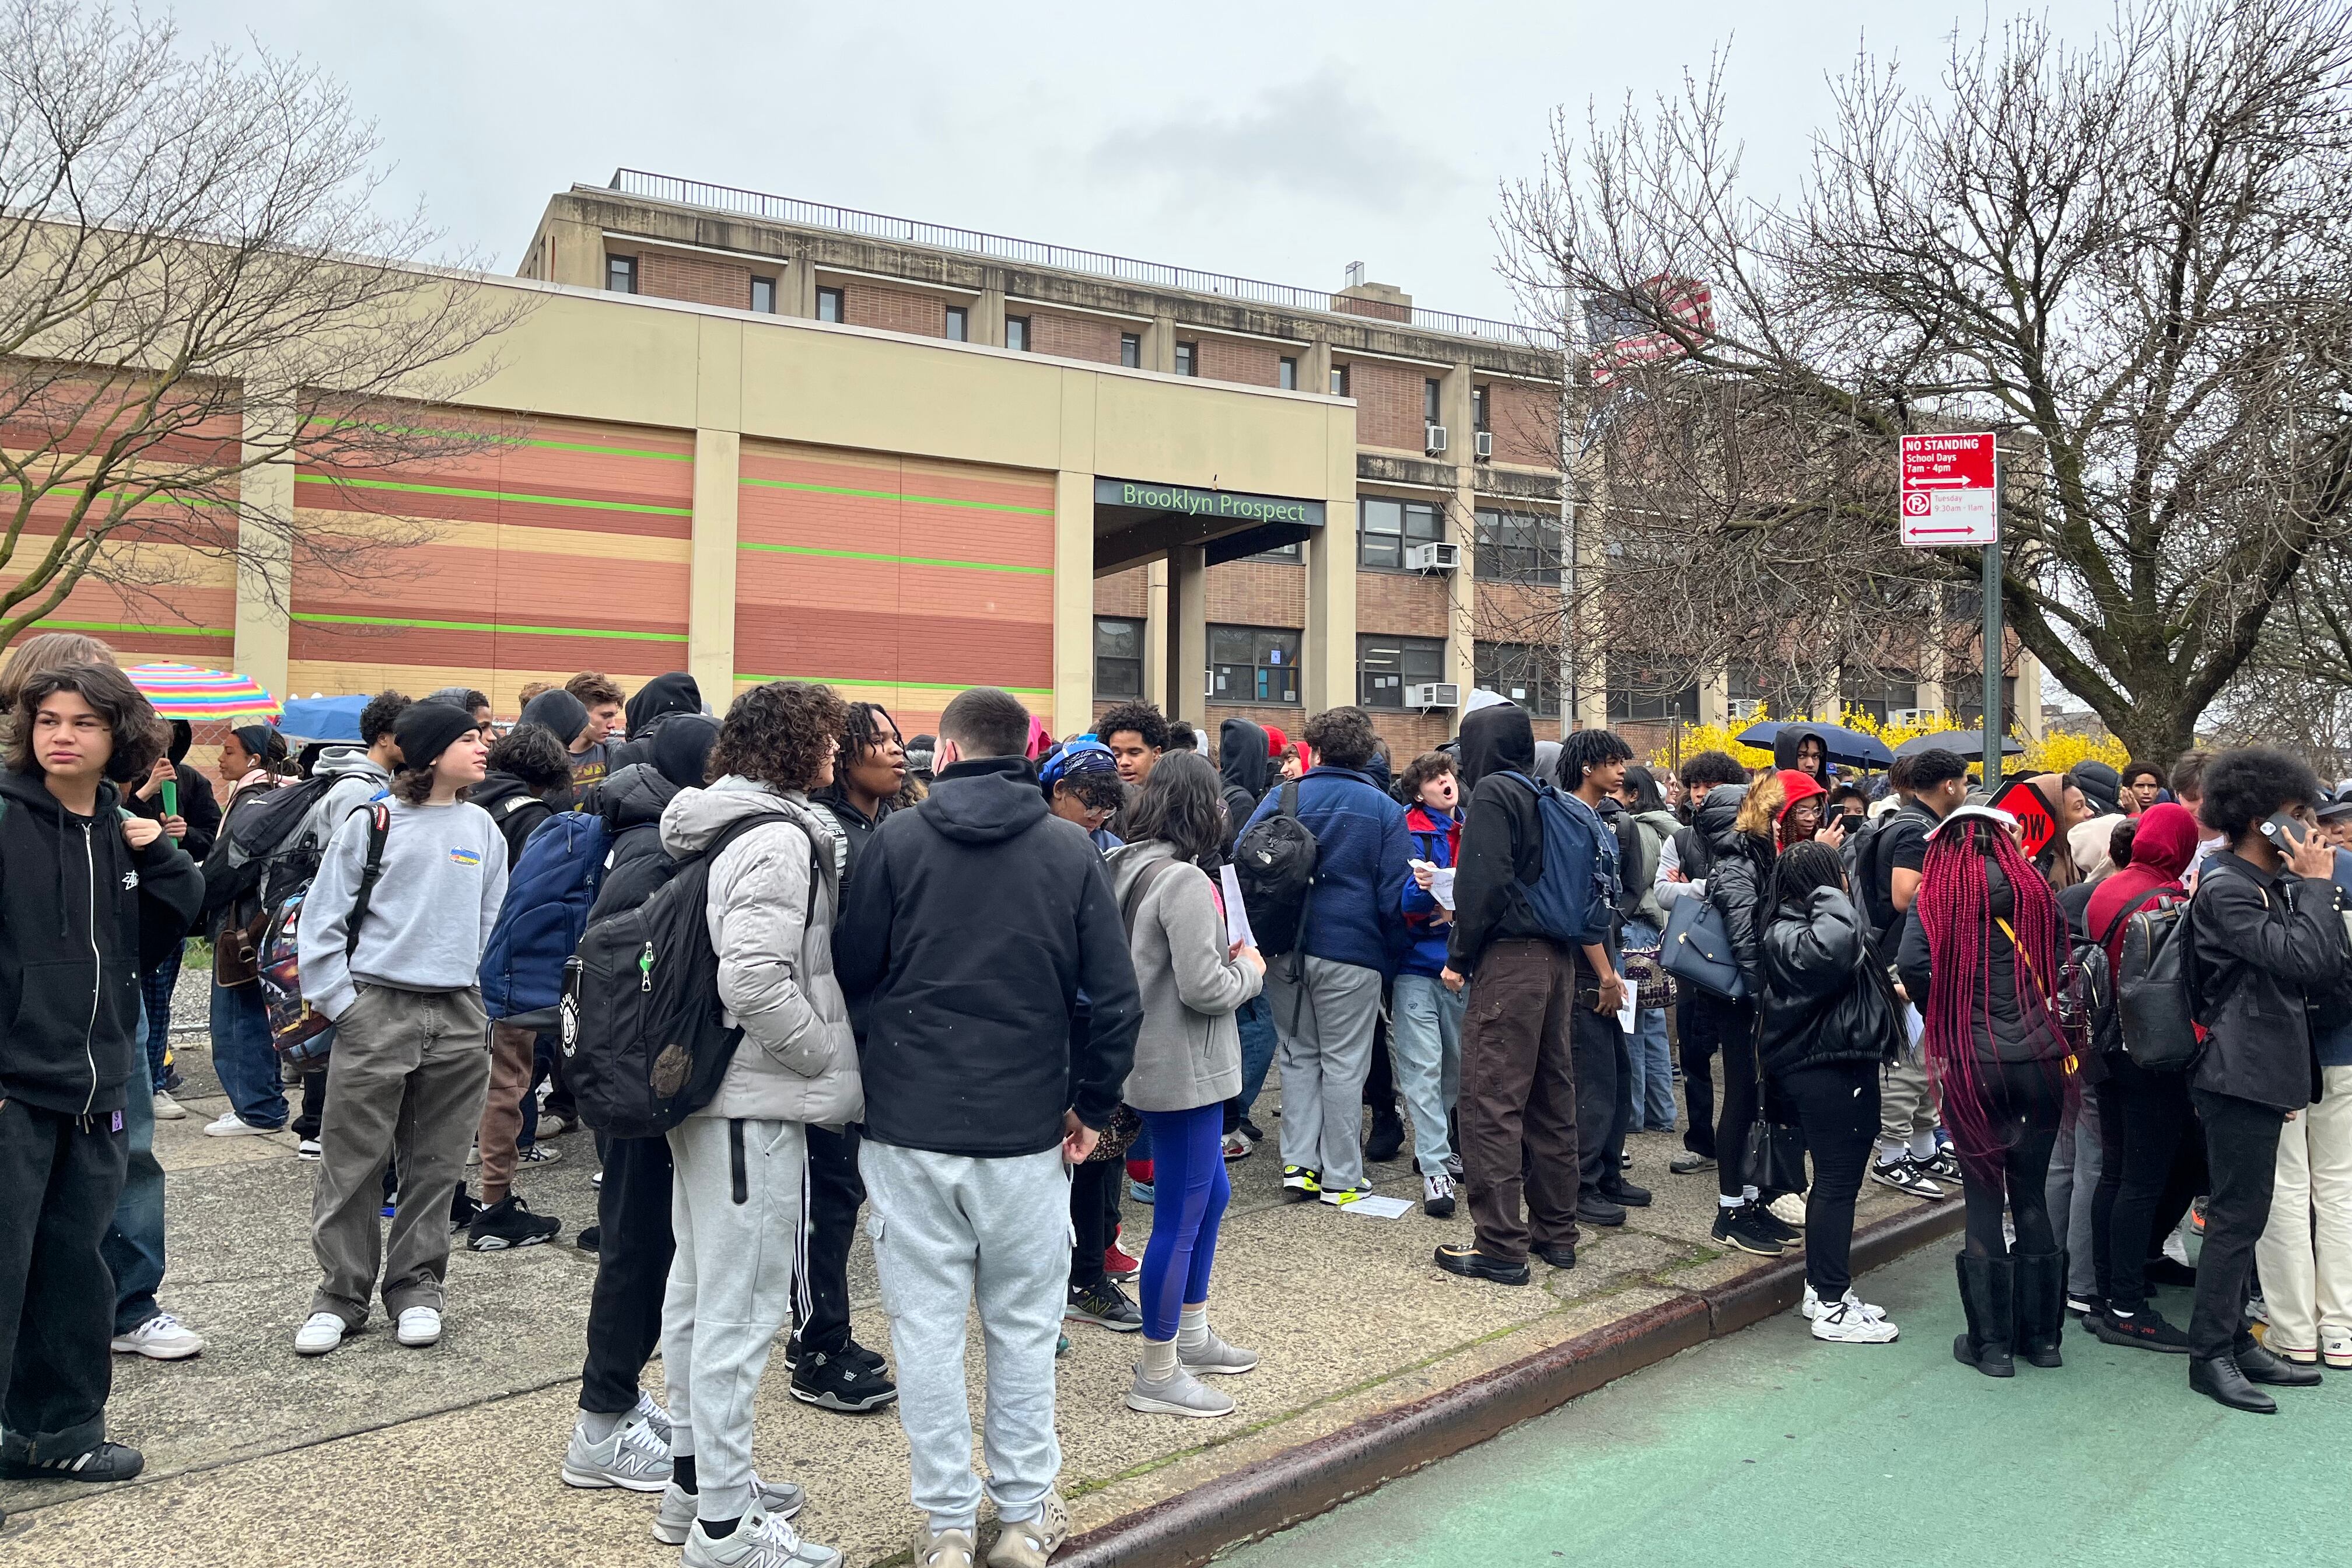 Hundreds of high school students stand outside of a school building.